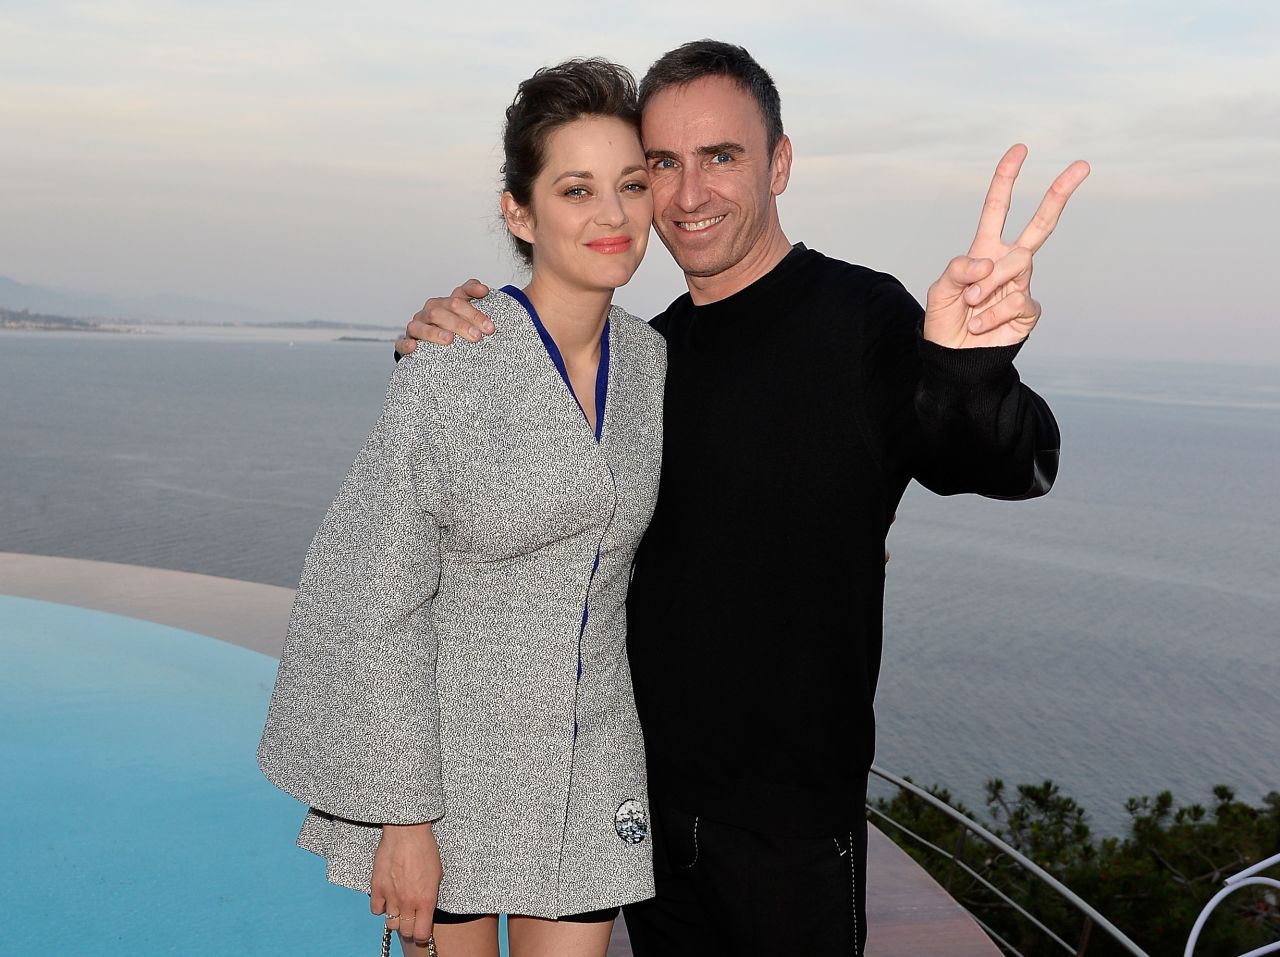 Raf Simons with Marion Cotillard in 2015